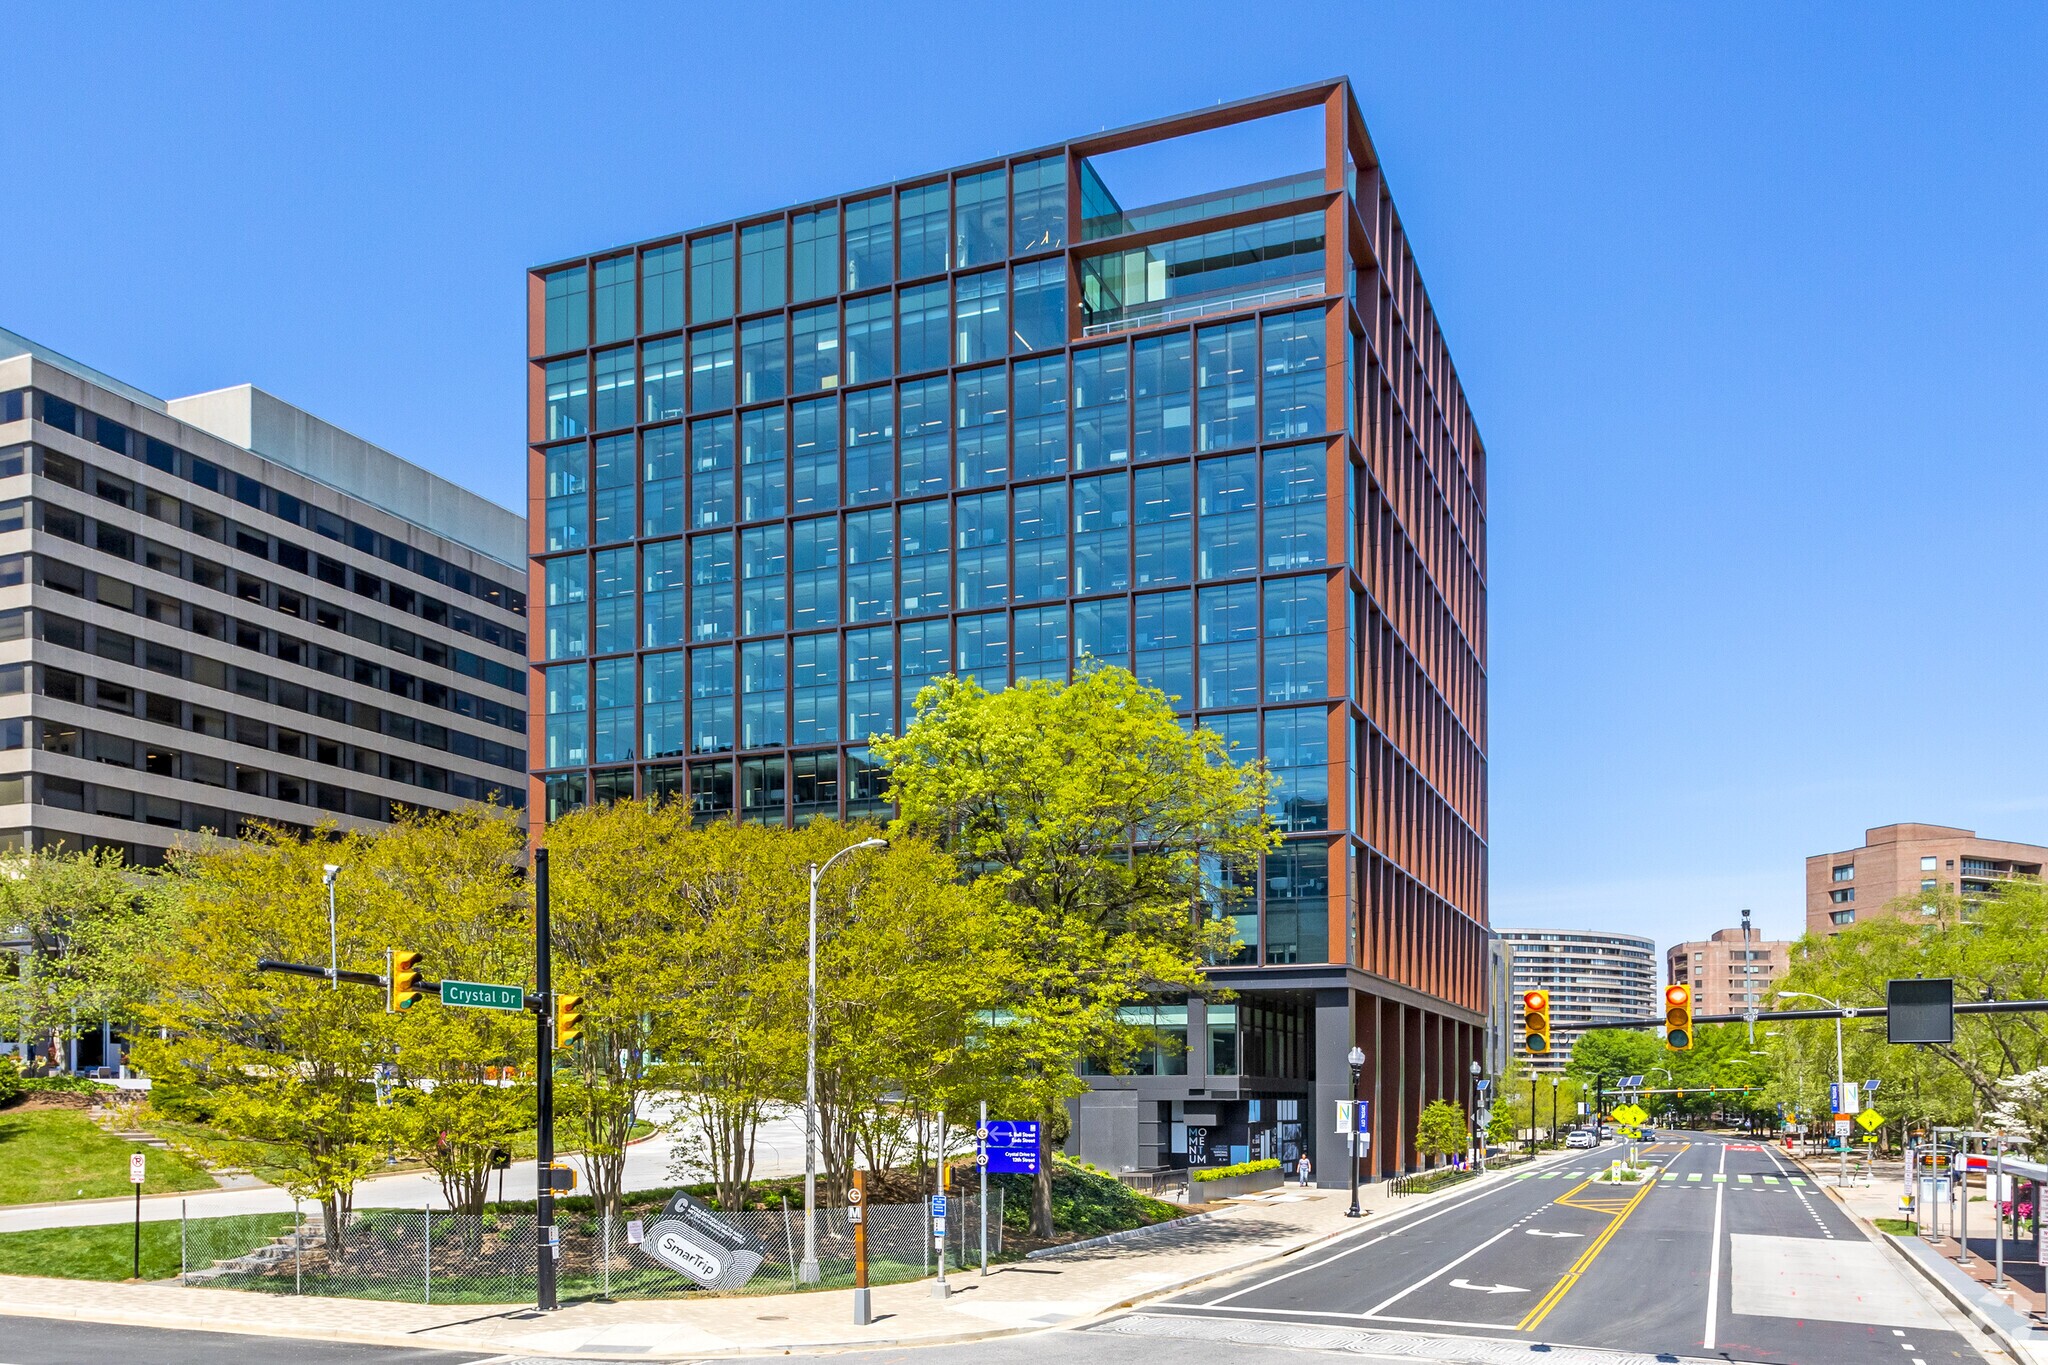 Since beginning its partnership with Amazon, JBG Smith has concentrated its office holdings in National Landing. It renovated its office at 1770 Crystal Drive in 2020 and now leases out the property to Amazon. (CoStar)